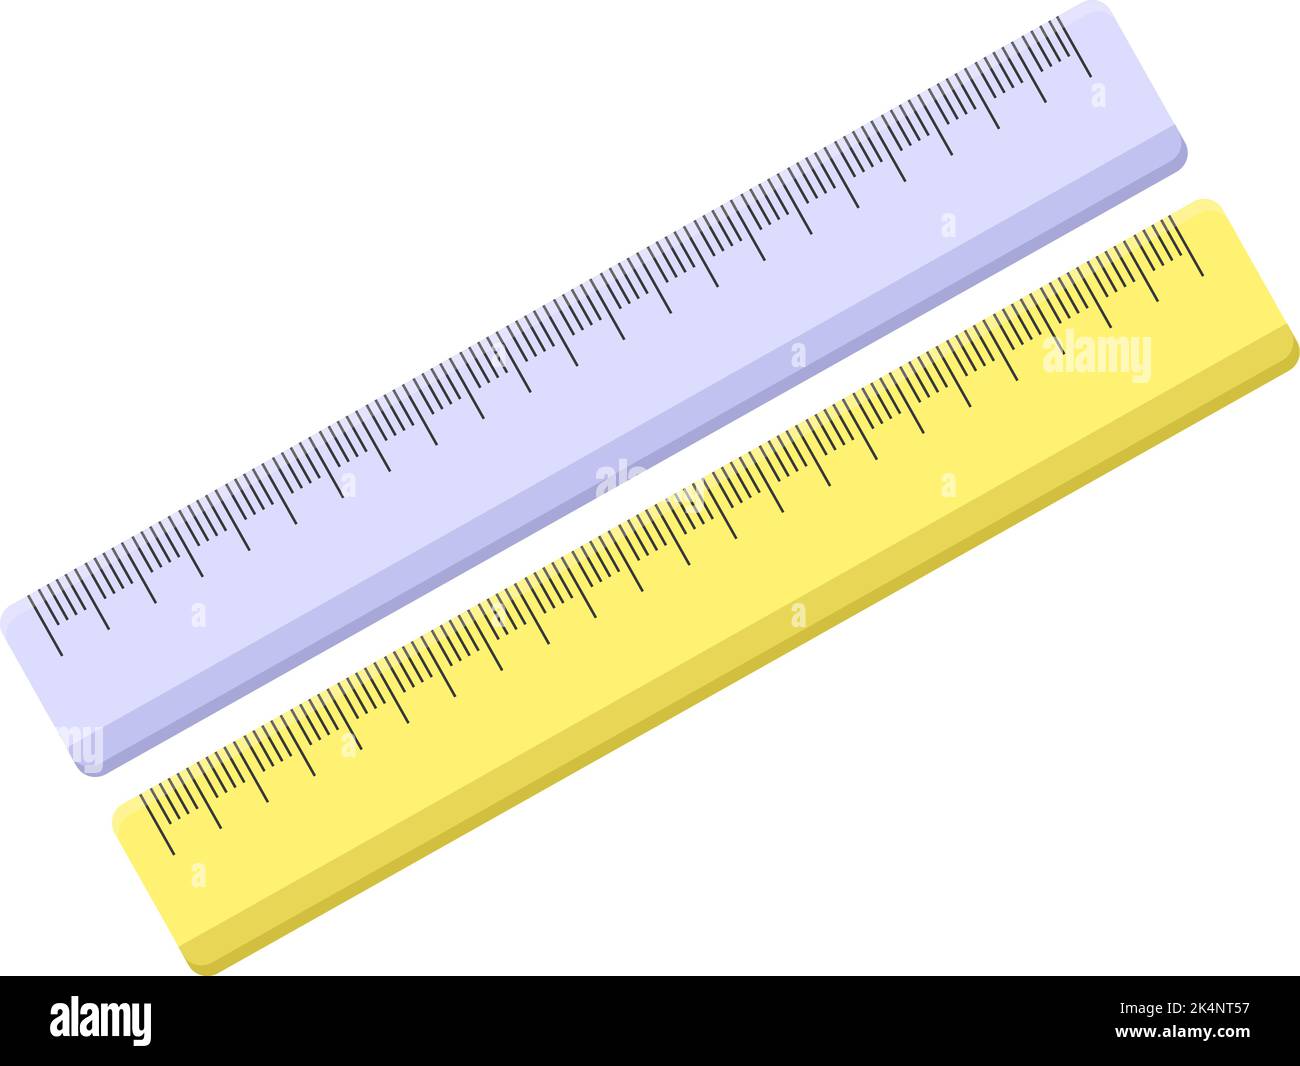 Plastic rulers, illustration, vector on a white background. Stock Vector